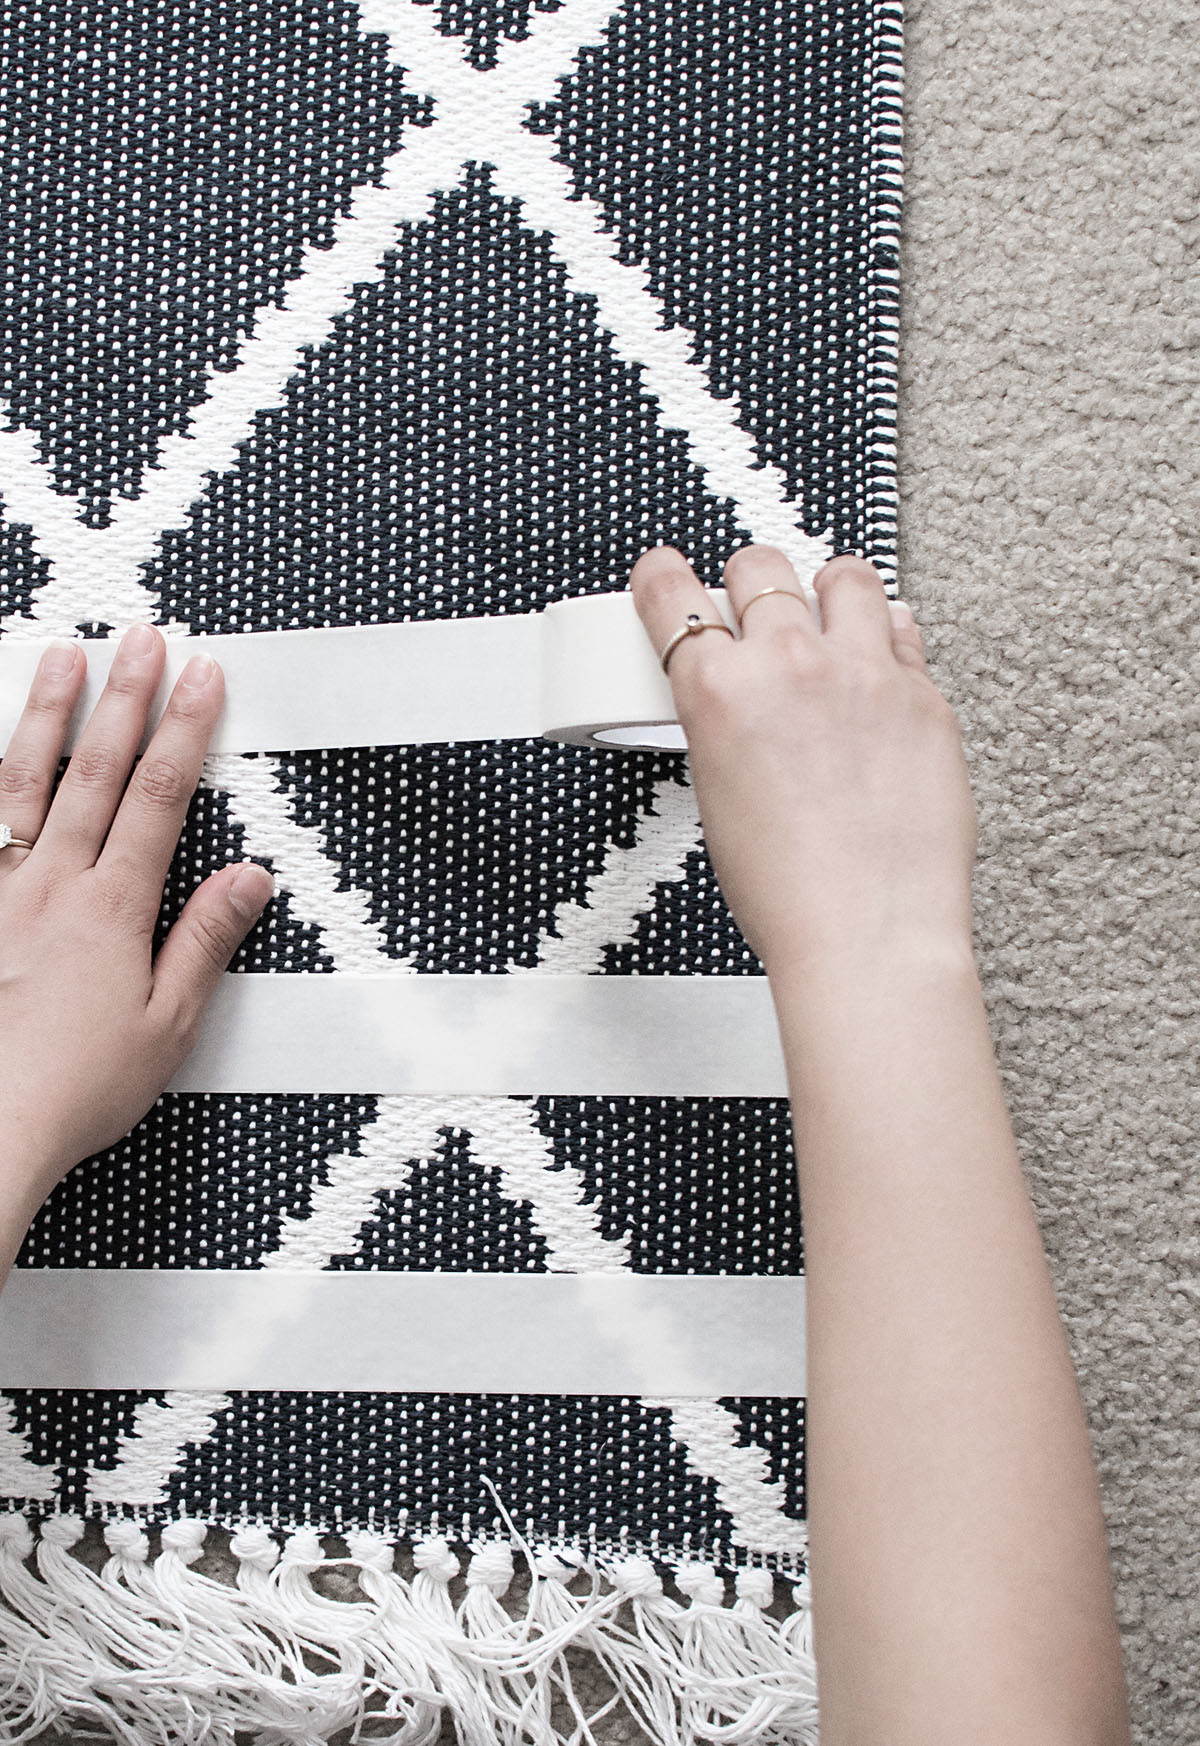 How to Stop Rugs From Sliding at Home